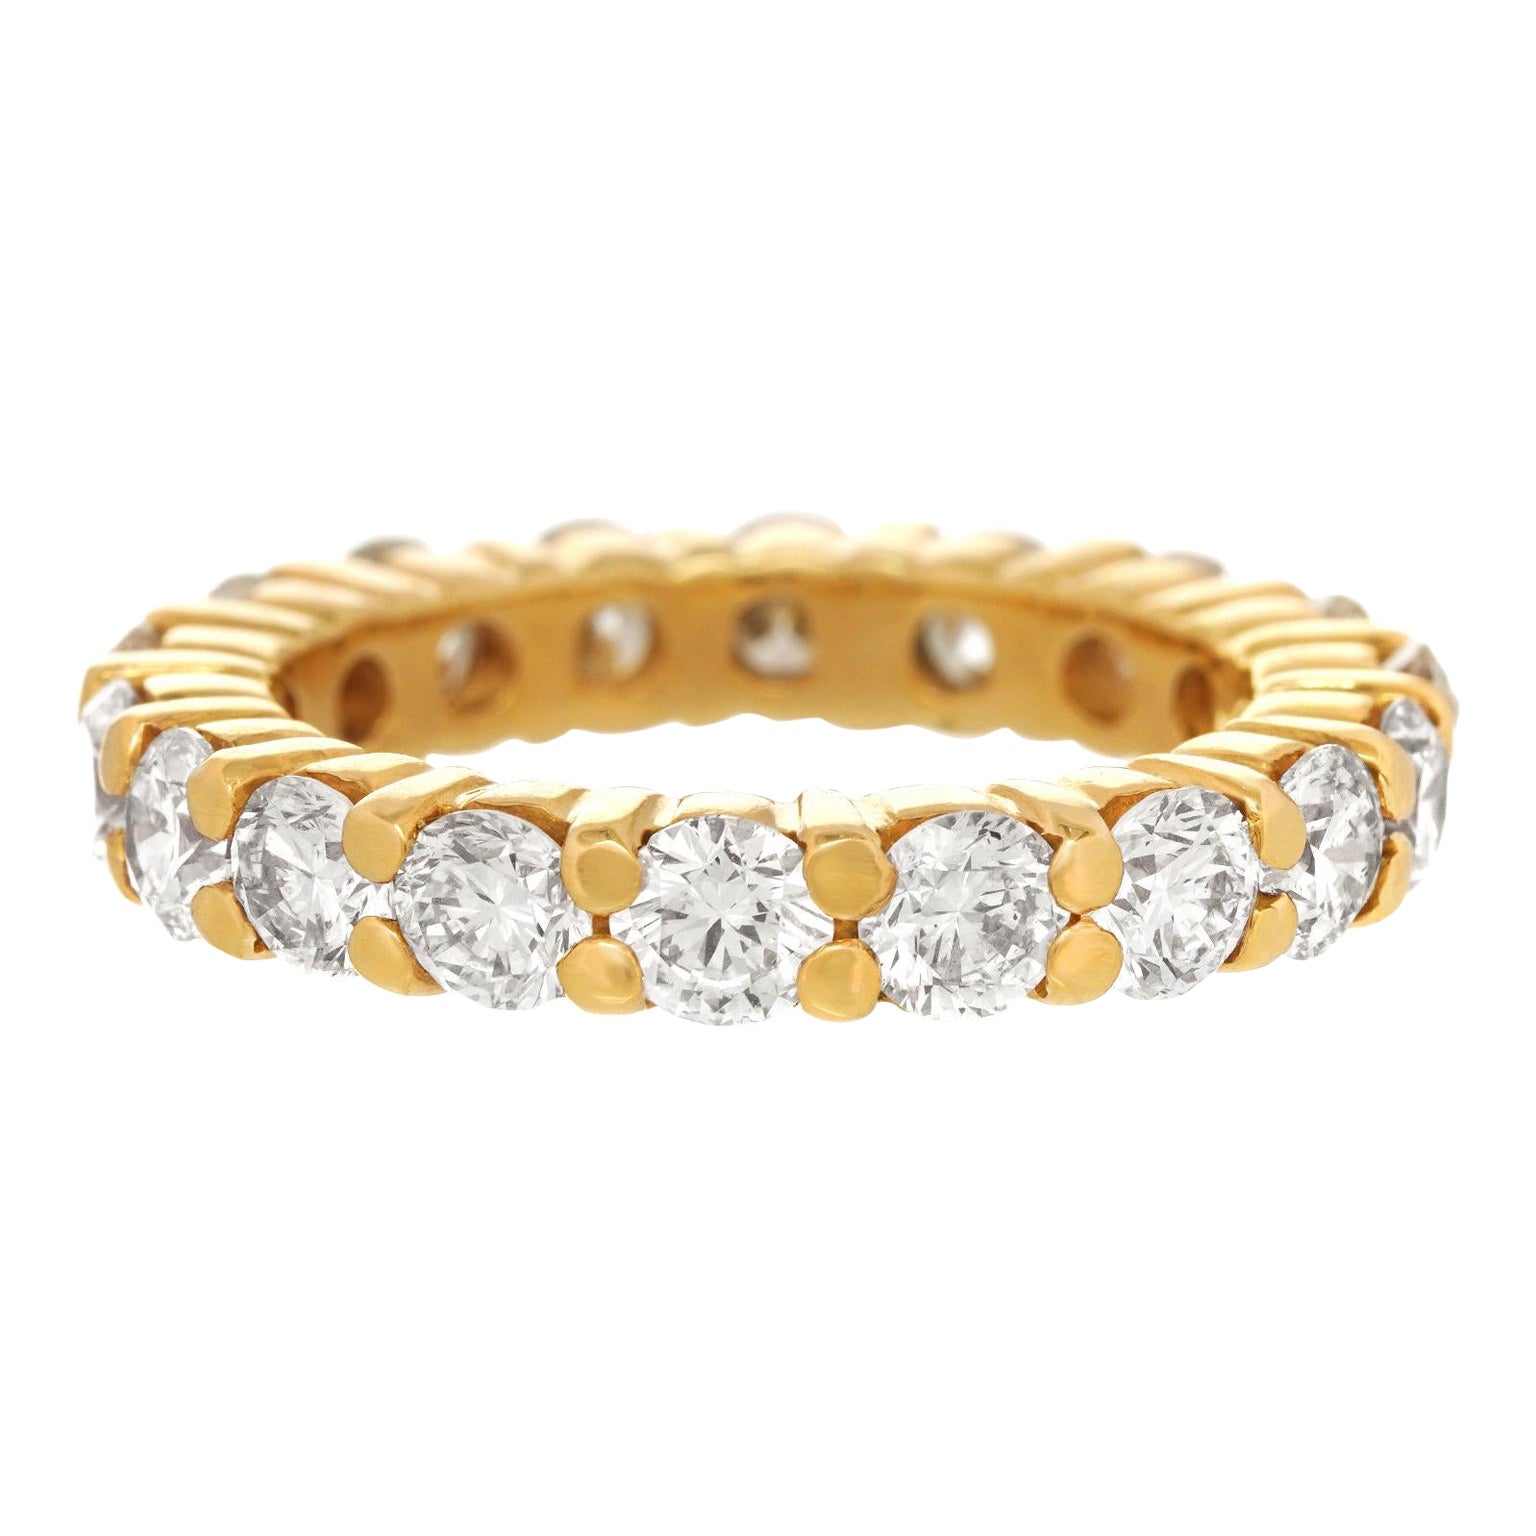 3.60 Carats Total Weight Eternity Band For Sale